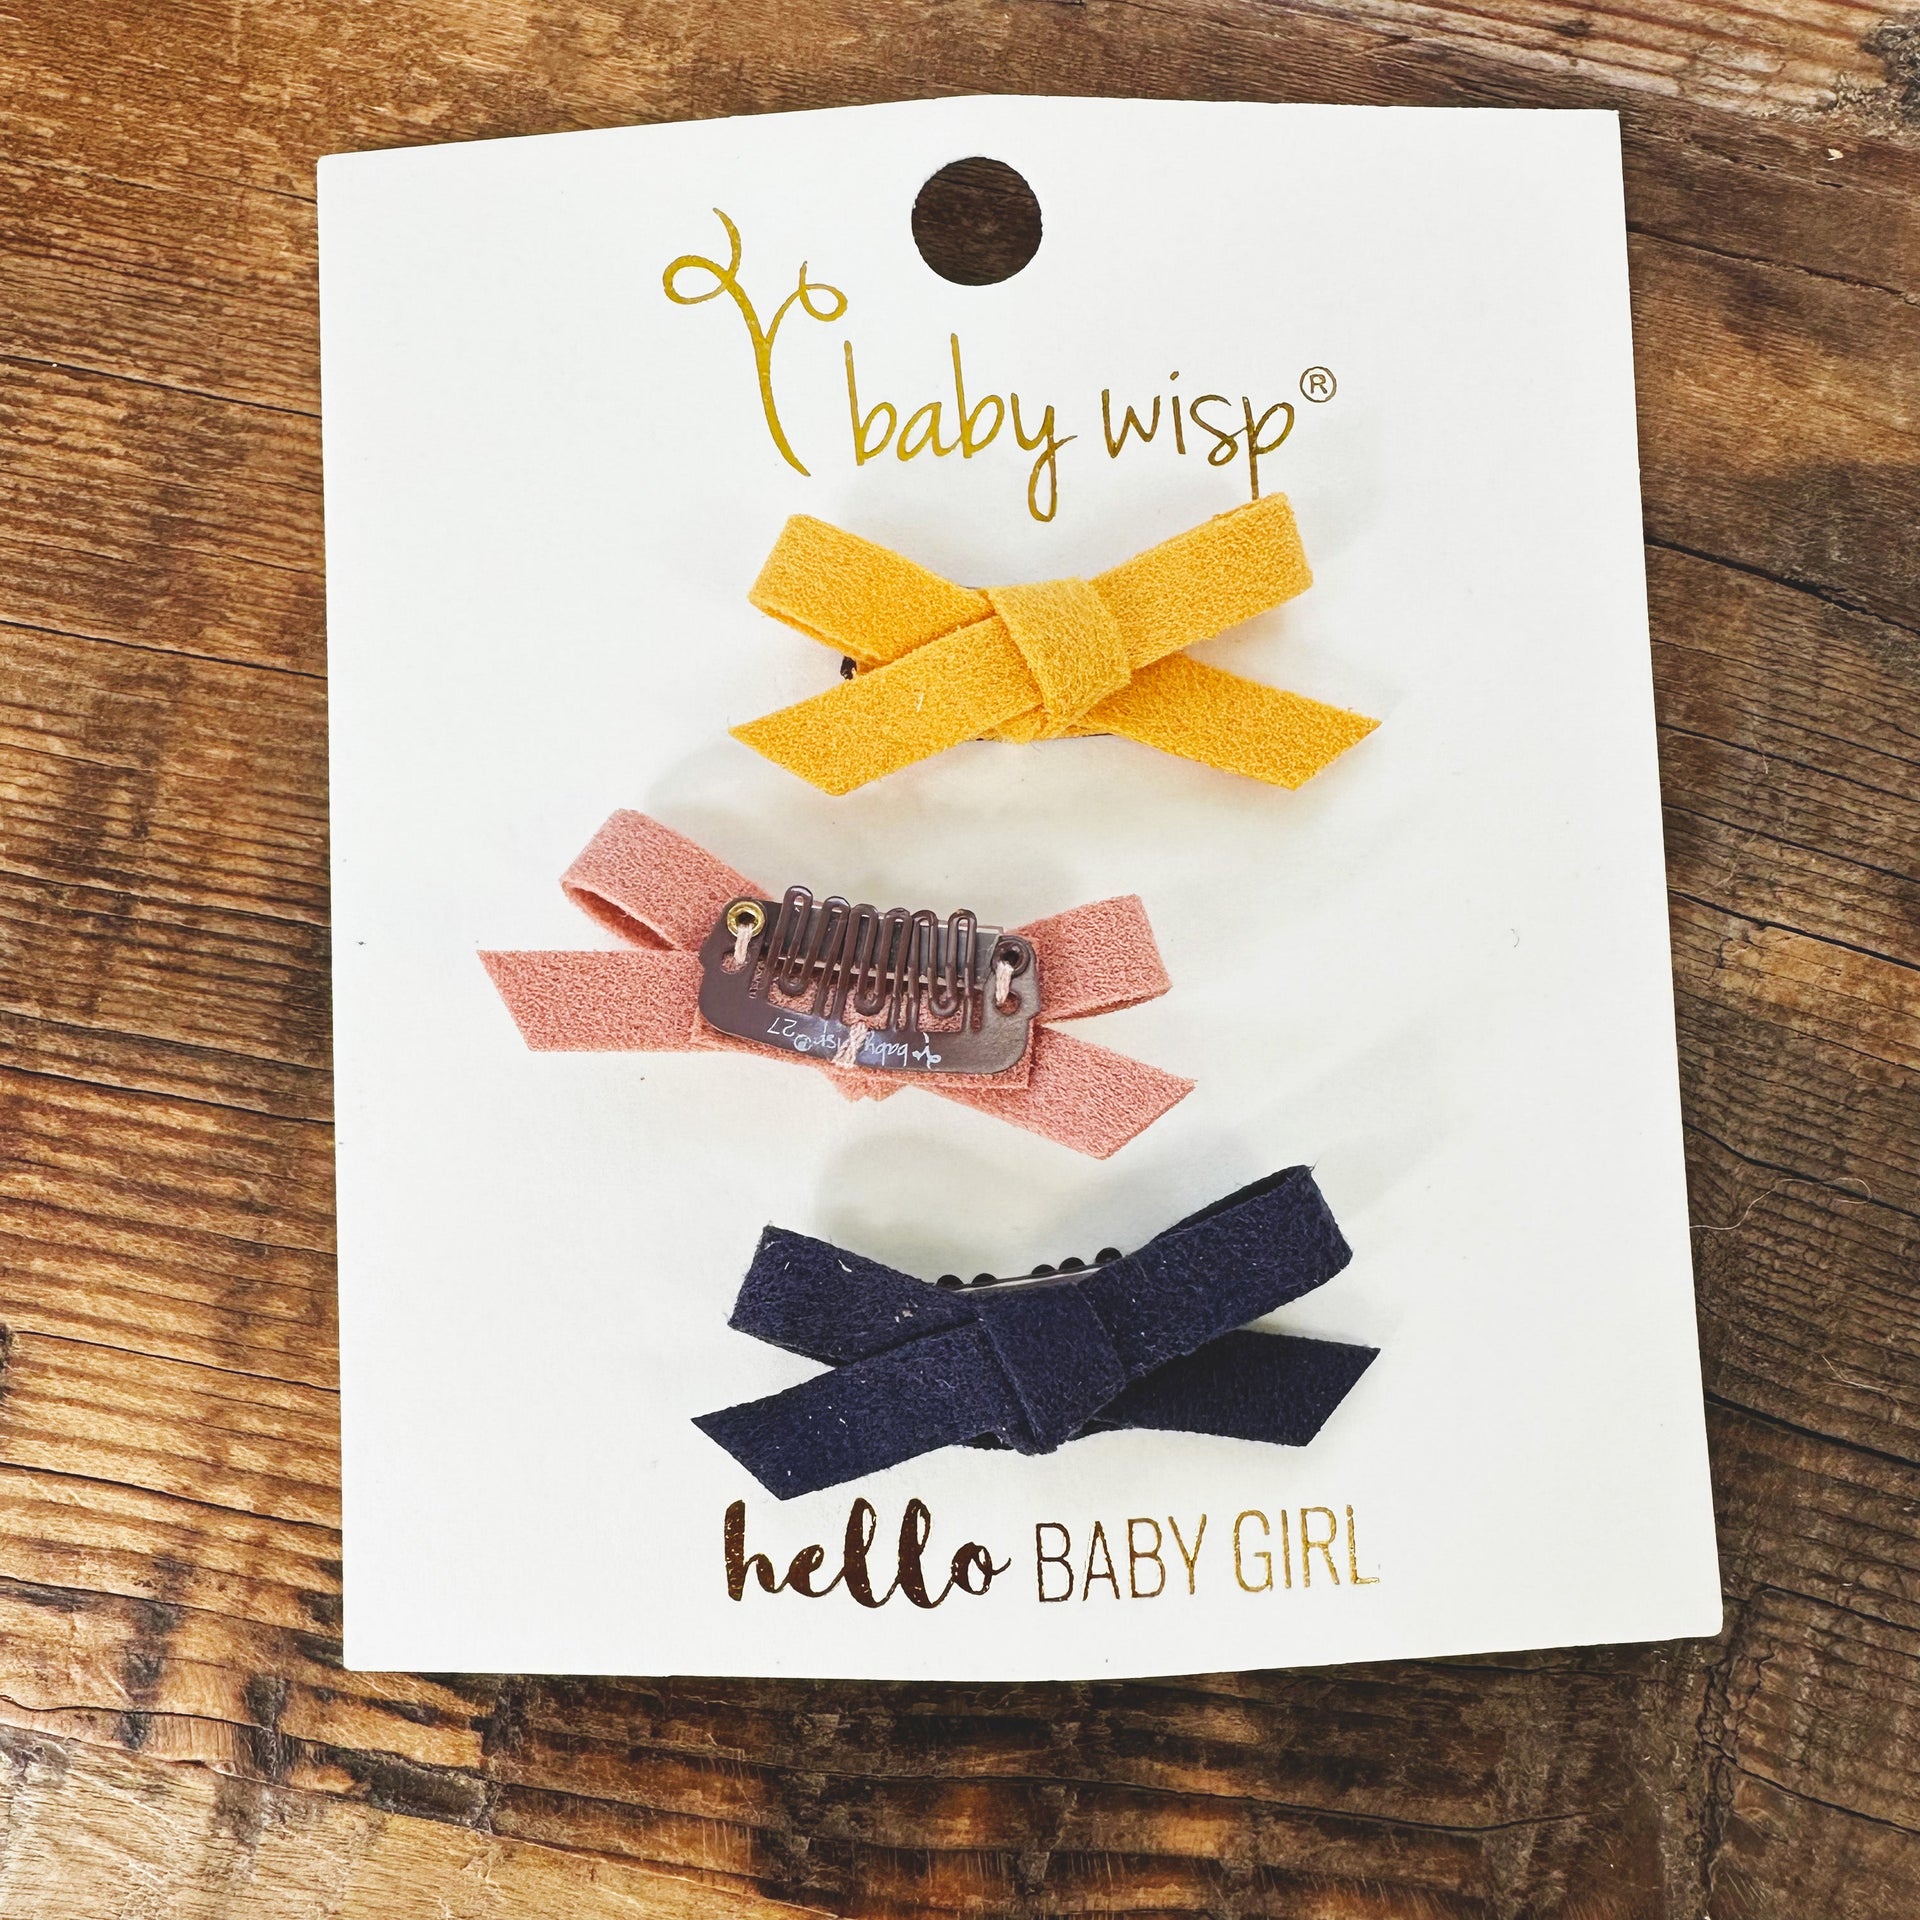 3 Mini Latch Wisp Clips - Faux Suede Hand Tied Baby Bows - Yellow Gold, Clay, and Navy Baby Wisp